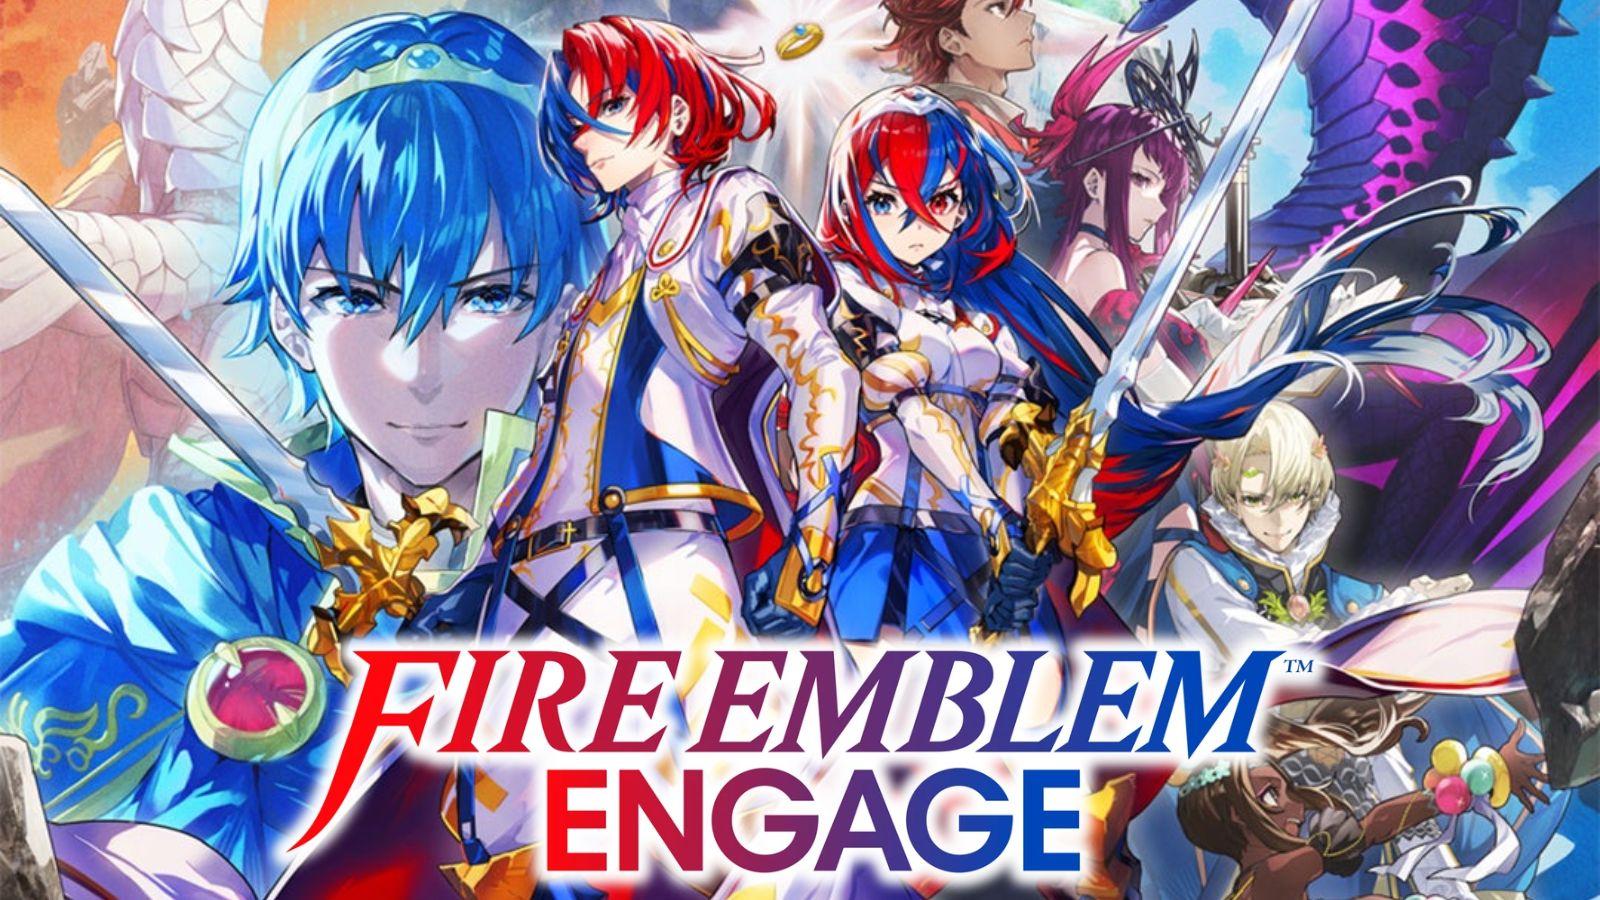 Fire emblem engage co-op or multiplayer